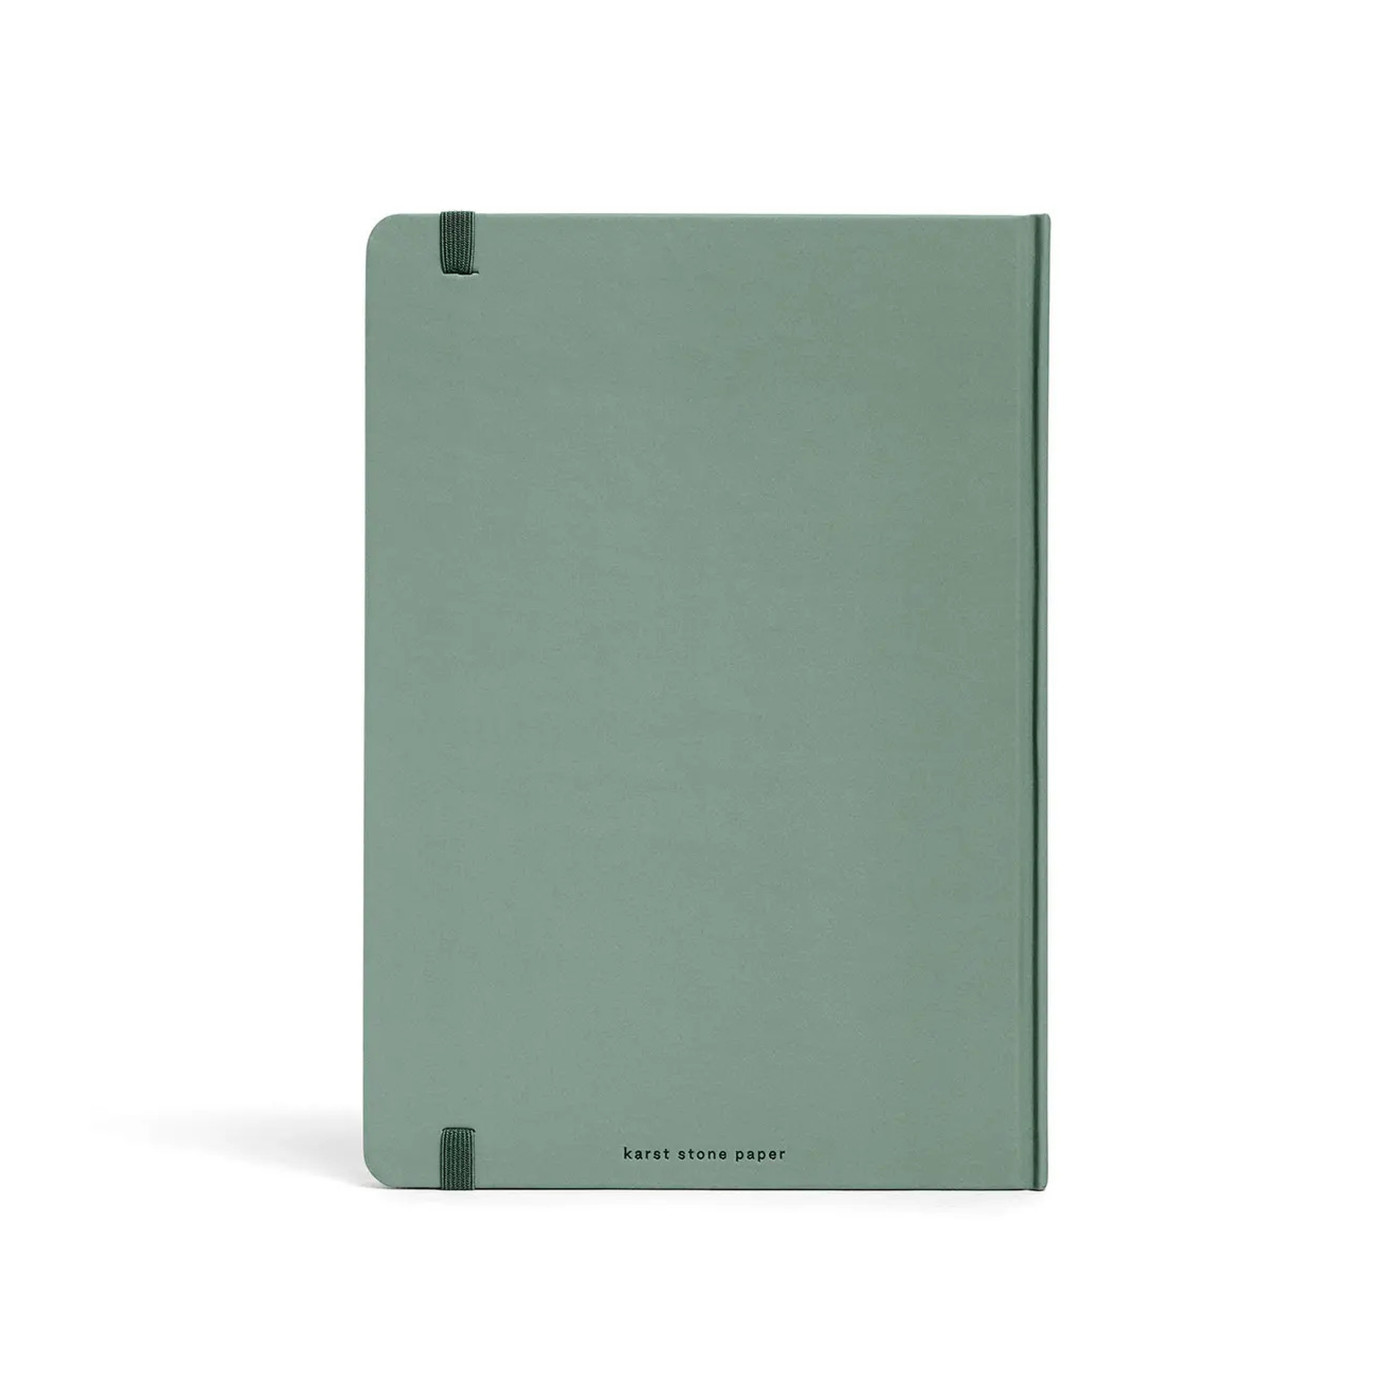 Karst stone paper notebook - hard cover - A5 SQUARED